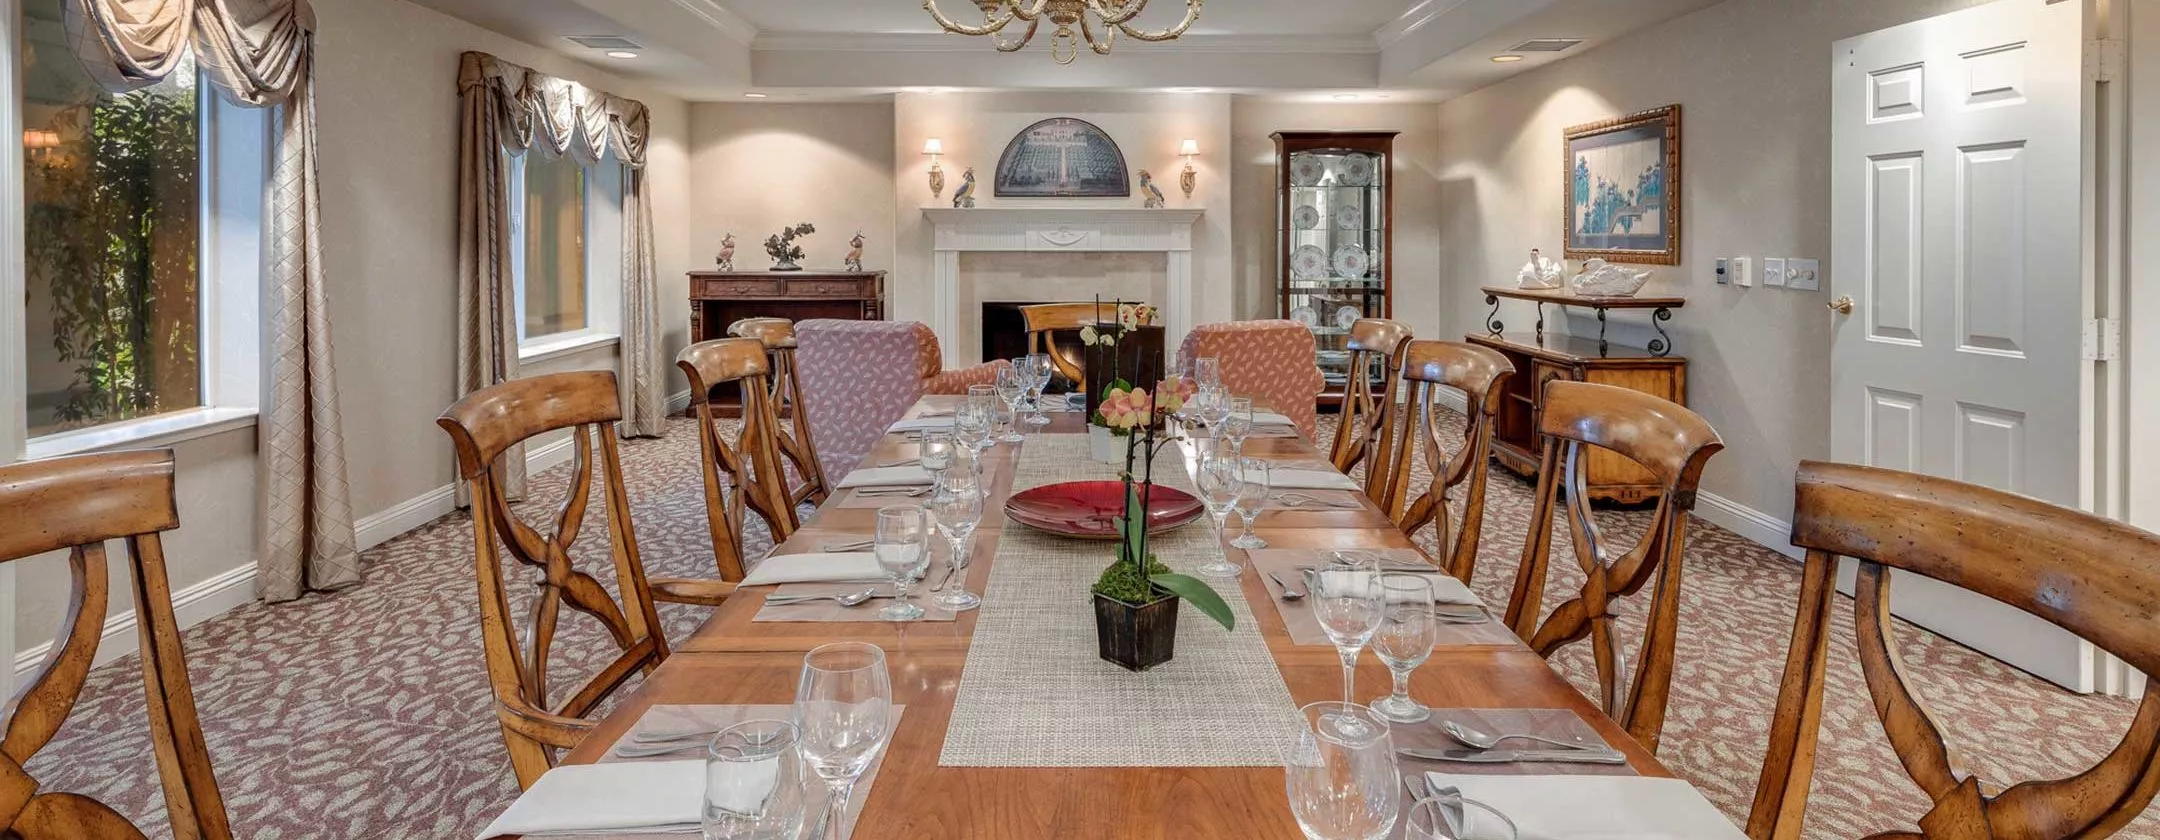 Chino hills elegant private dining room with long table